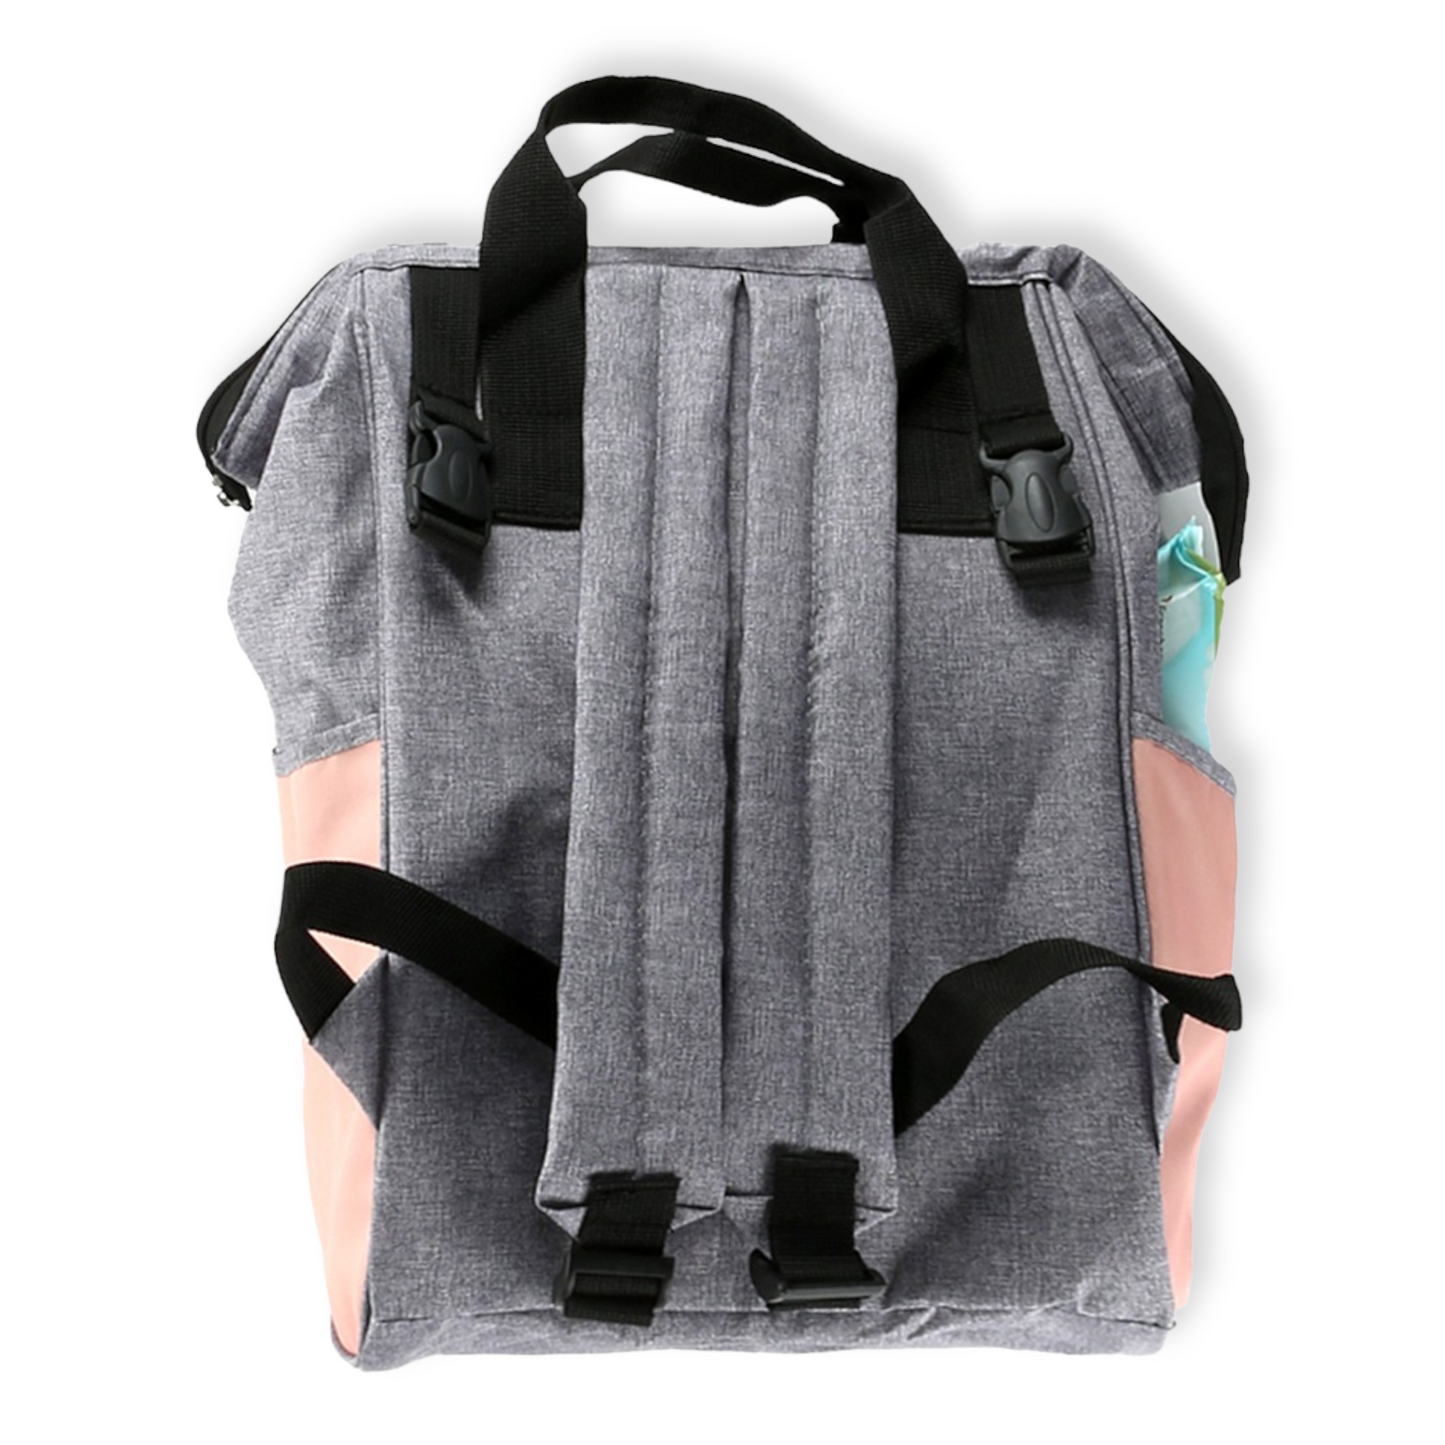 Pink and Grey Mommy Bag-Bag, Bags, catbabygear, catbag, Changing, Diapers, Grey, Maternity, Nappy, Nursery, Pink, Travel-Safe Line-[Too Twee]-[Tootwee]-[baby]-[newborn]-[clothes]-[essentials]-[toys]-[Lebanon]